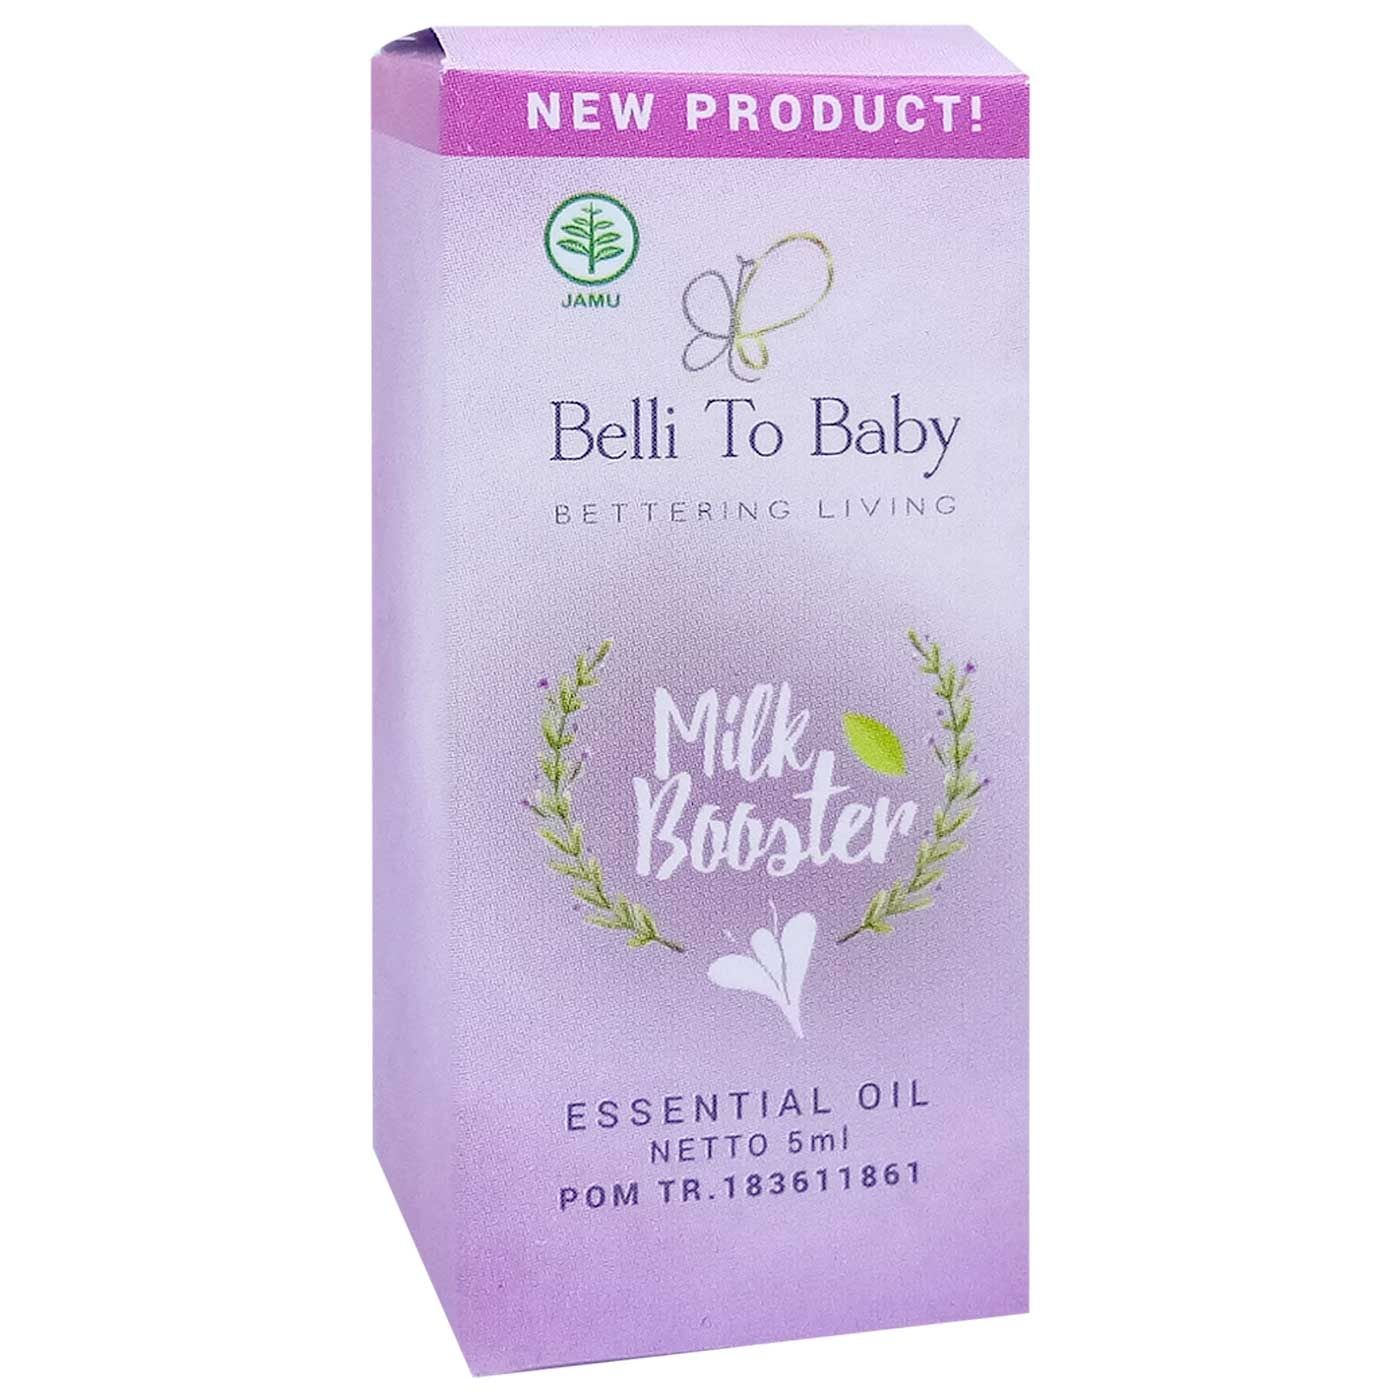 Belli To Baby Essential Oil Milk Booster 5ml - 3